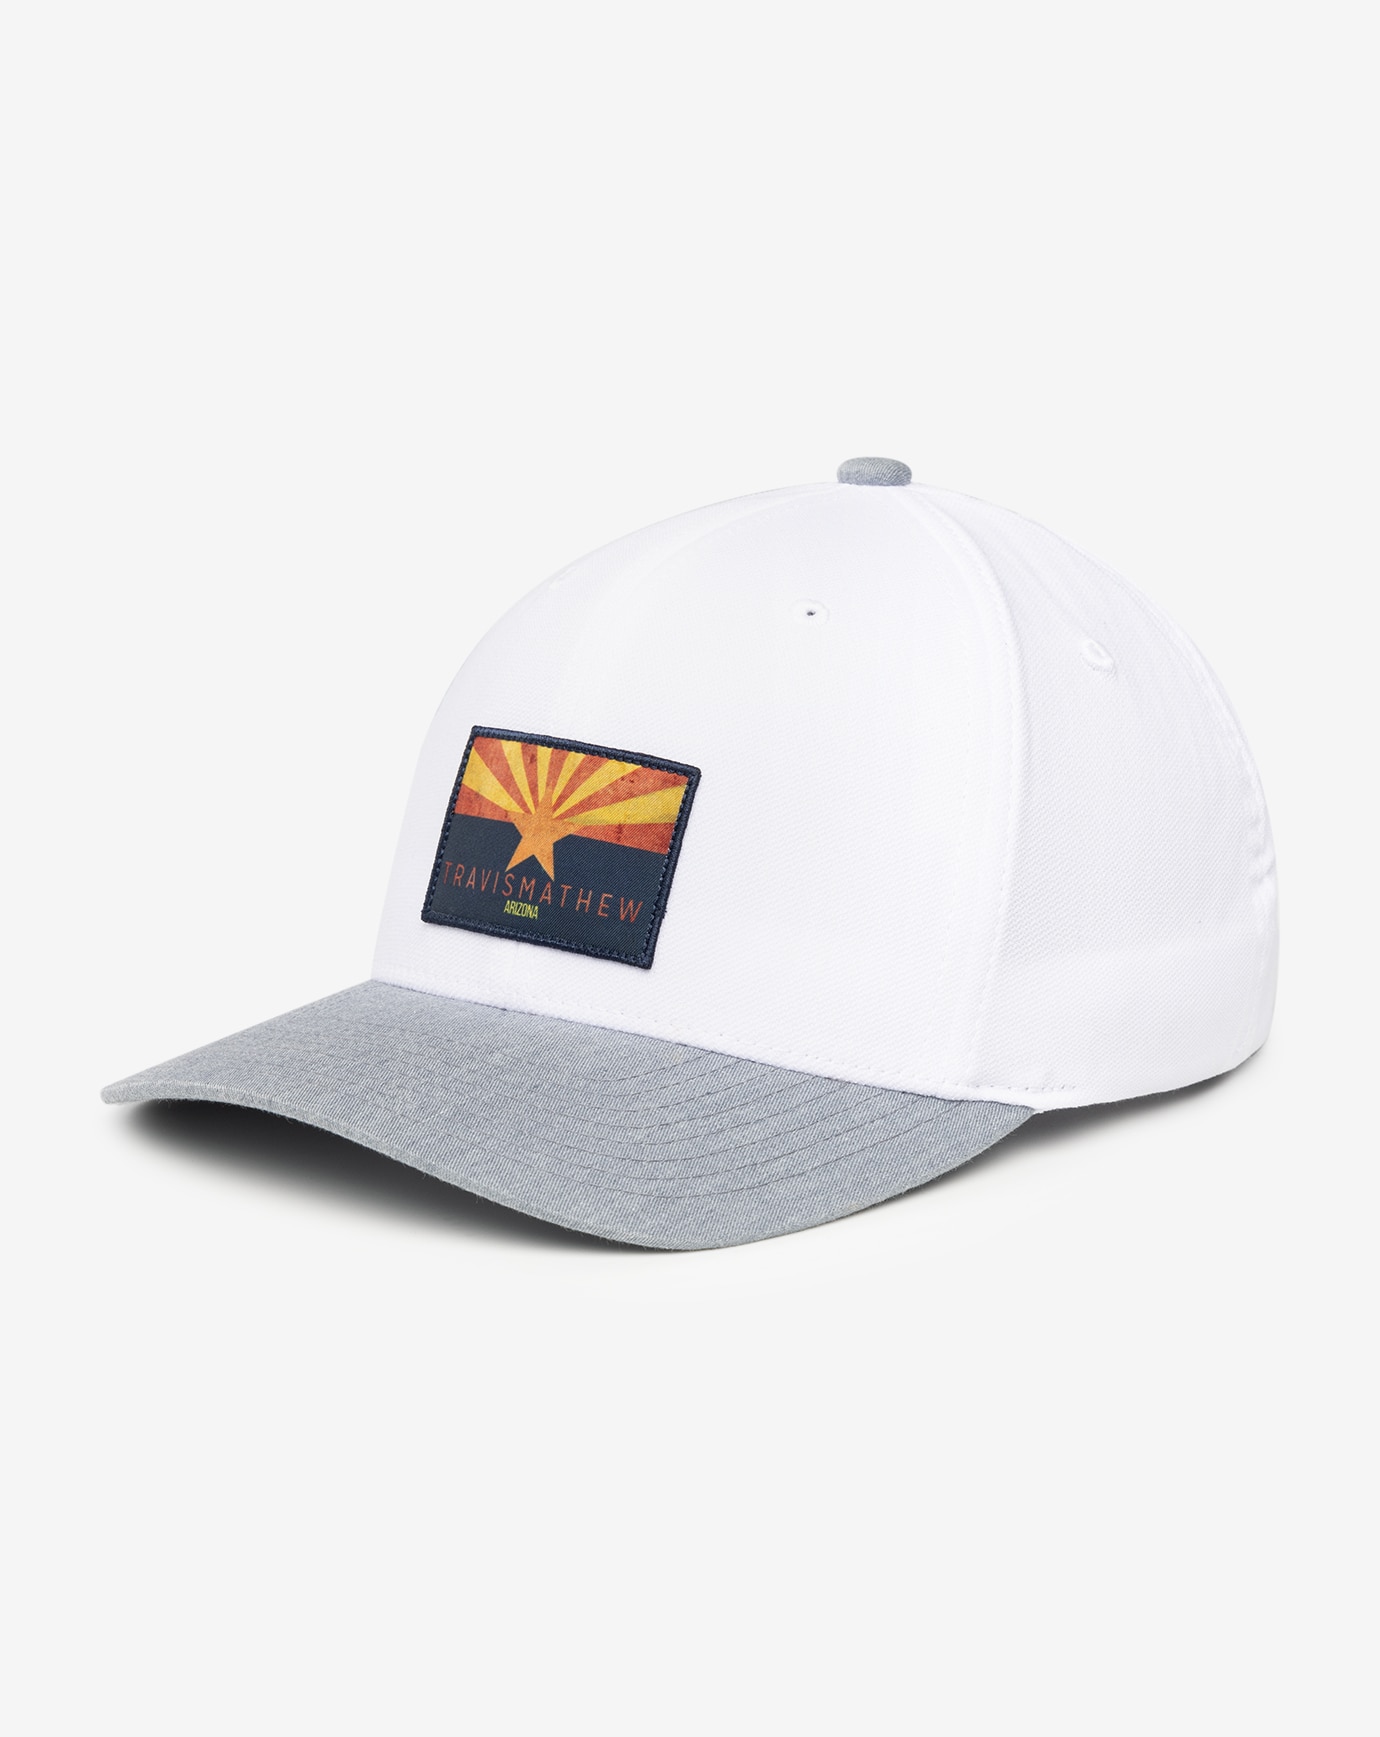 VALLEY OF THE SUN 2.0 SNAPBACK HAT Image Thumbnail 2